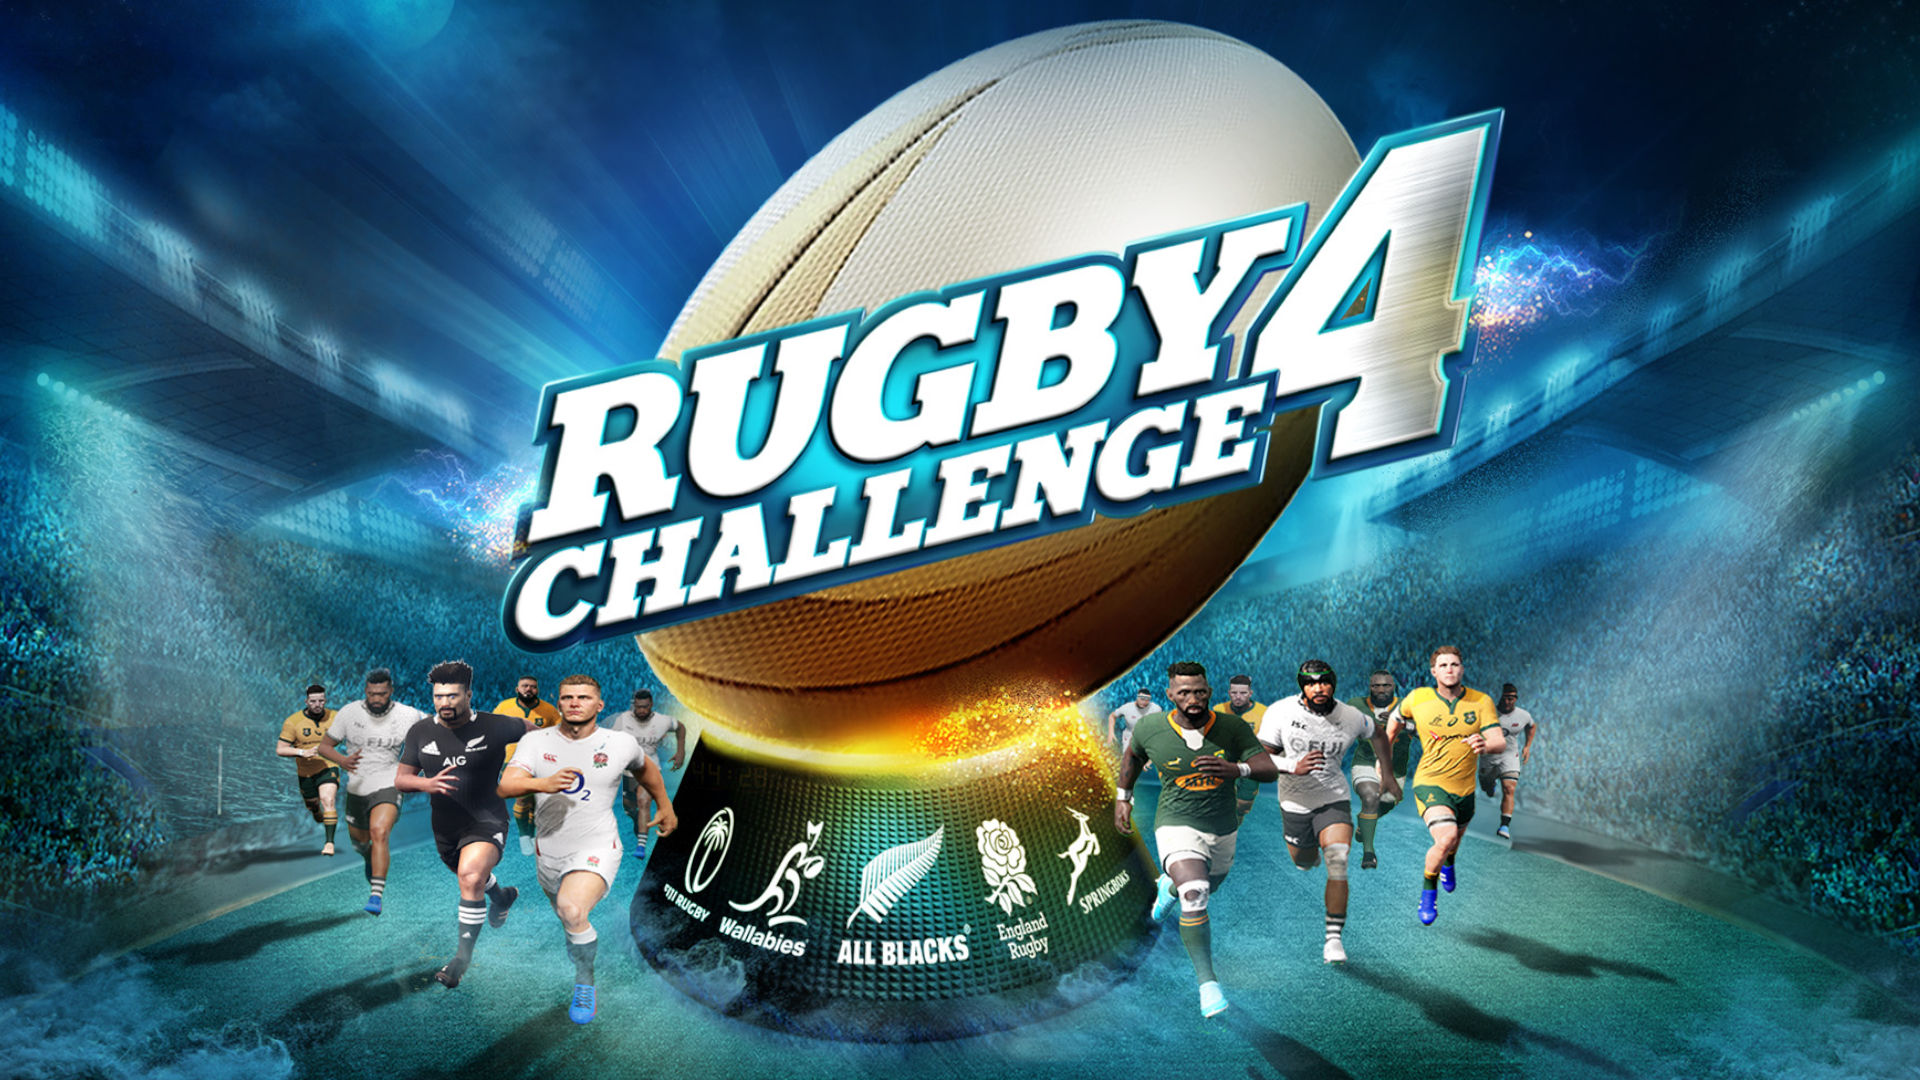 Rugby Challenge 4, the most realistic sim of the Switch rugby games